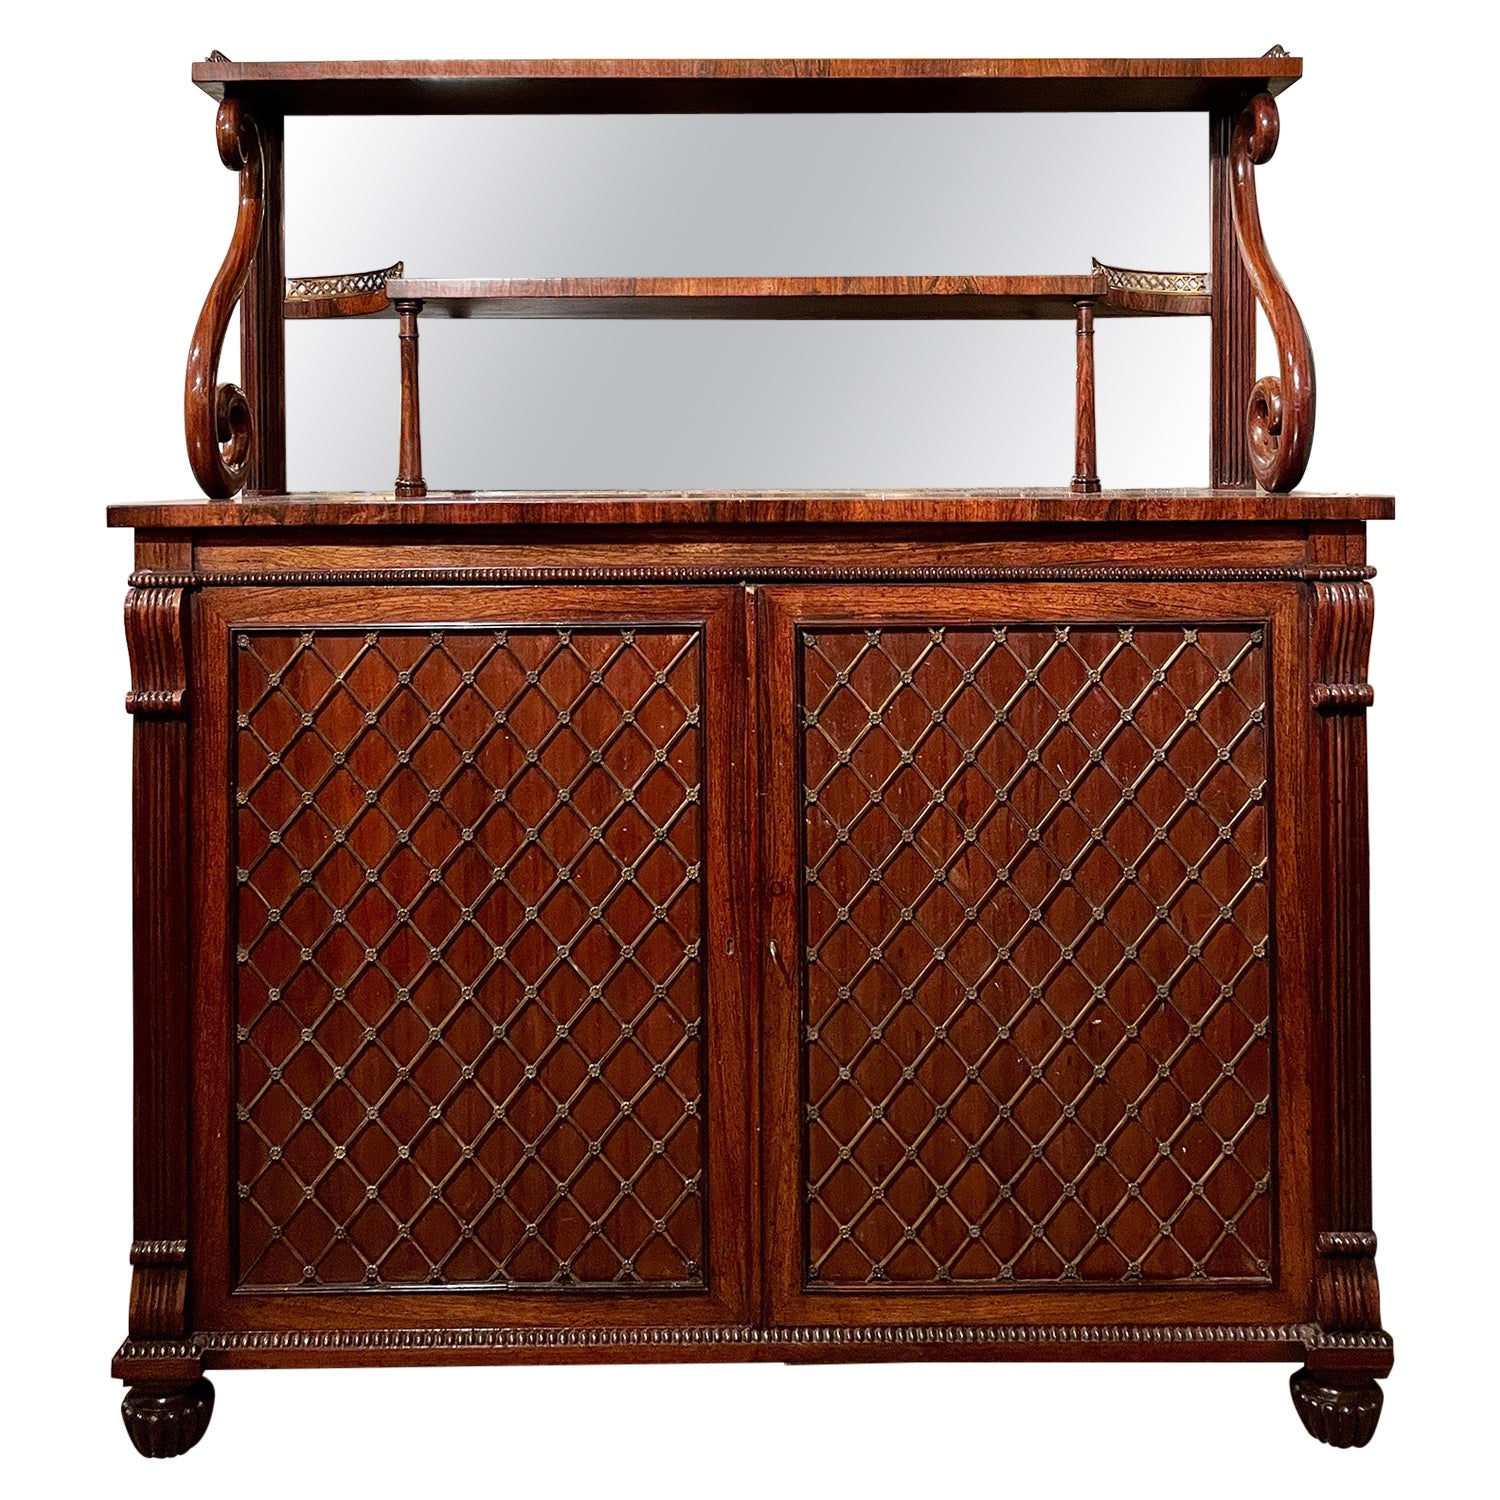 Antique English Regency Rosewood Cabinet with Mirror & Galleried Top, circa 1830 For Sale